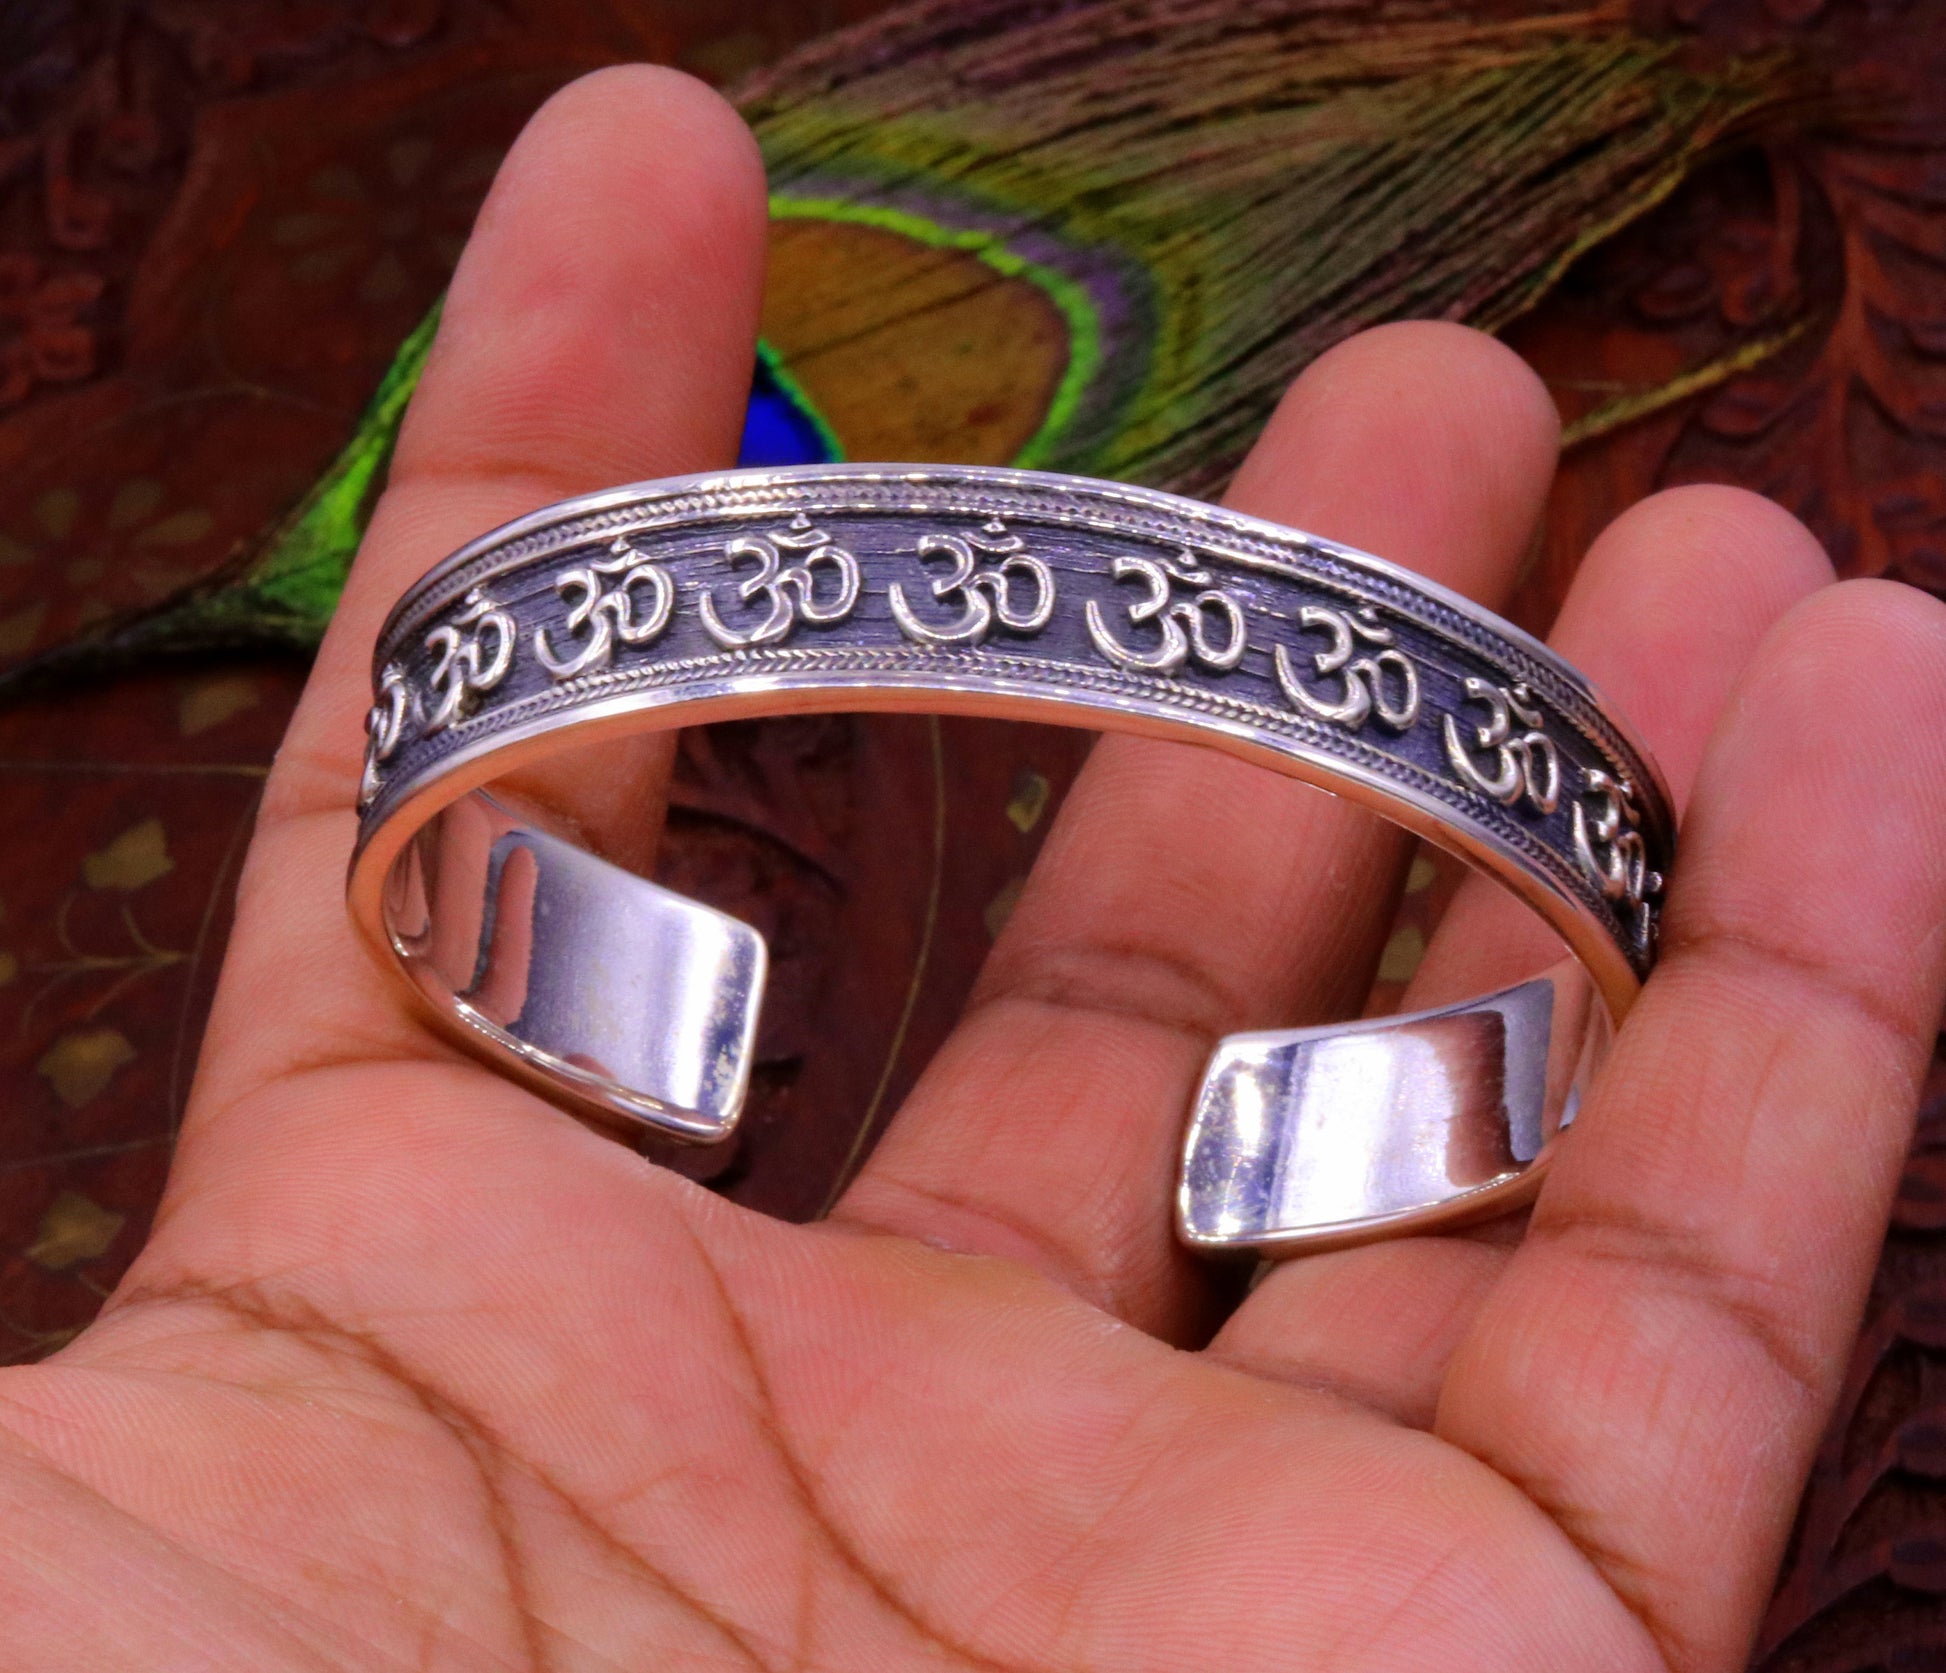 925 sterling silver handmade 'Aum' Mantra adjustable bangle bracelet kada, solid silver men's women's gifting jewelry from india cuff49 - TRIBAL ORNAMENTS